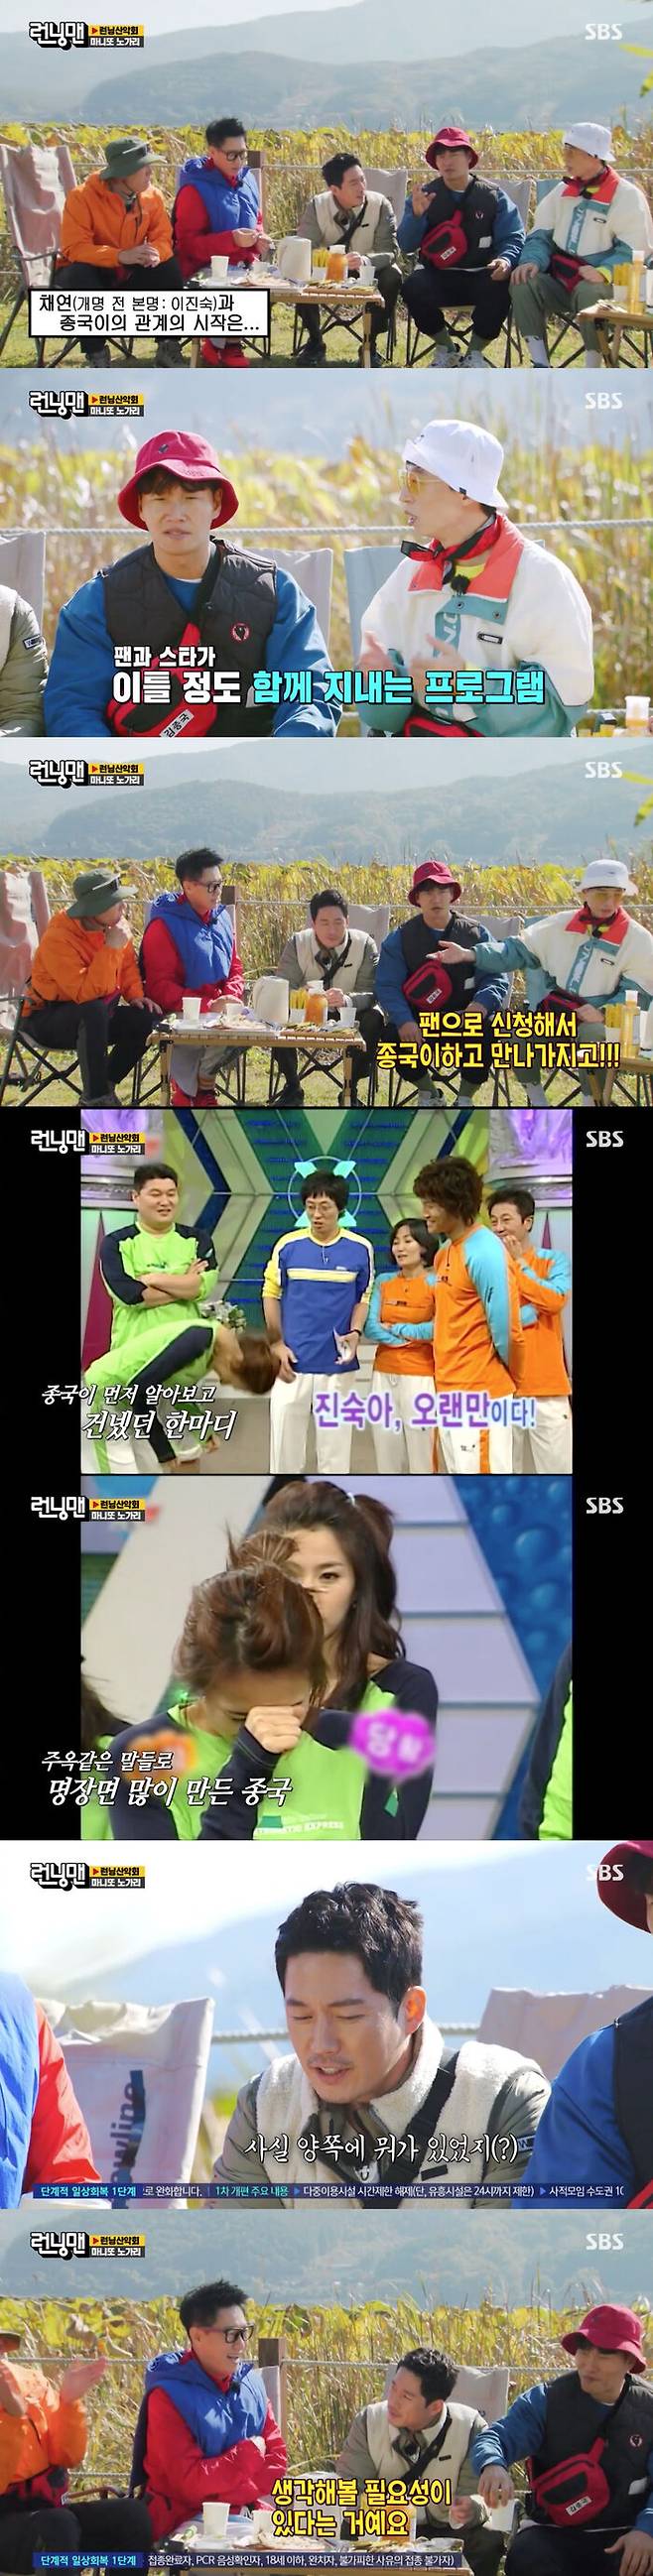 Jang Hyuk mentioned the love line of best friend Kim Jong-kook.On SBS Running Man broadcasted on the 7th, the running mountain club Race was held.On the day of the show, the members enjoyed nogari time for 30 minutes. The members constantly talked according to the rule that 10,000 one expenses were added if the silence flowed for more than 5 seconds.Then Ji Suk-jin asked Kim Jong-kook, What is the story that Chae Yeon liked you?Yoo Jae-Suk then explained, Chae Yeon met as a fan.In response to Kim Jong-kooks protest that the tone is strange, Yoo Jae-Suk explained the cause.Chae Yeon appeared on a program where the star and fan met and enjoyed dating before her debut as a singer, and said she met Kim Jong-kook; she has since been reunited at X-Men.Haha said, At that time, Of course, Jin Sook said, Do you remember me? My brother opened his eyes and said, How are you?I did, teased Kim Jong-kook, who then said, Hey!I first explained, How are you? And the broadcast video was released and attracted attention.At this time, Yang Se-chan asked the relationship between Chae Yeon and Yoon Eun-hye and Kim Jong-kook, So it was a triangle at that time, and Jang Hyuk quipped, There was something on both sides, not triangles.Kim Jong-kook said, There is something there. Jang Hyuk suddenly looked at Kim Jong-kook, who drank water, and laughed, pointing out, It is necessary to think that he is drinking water like this.